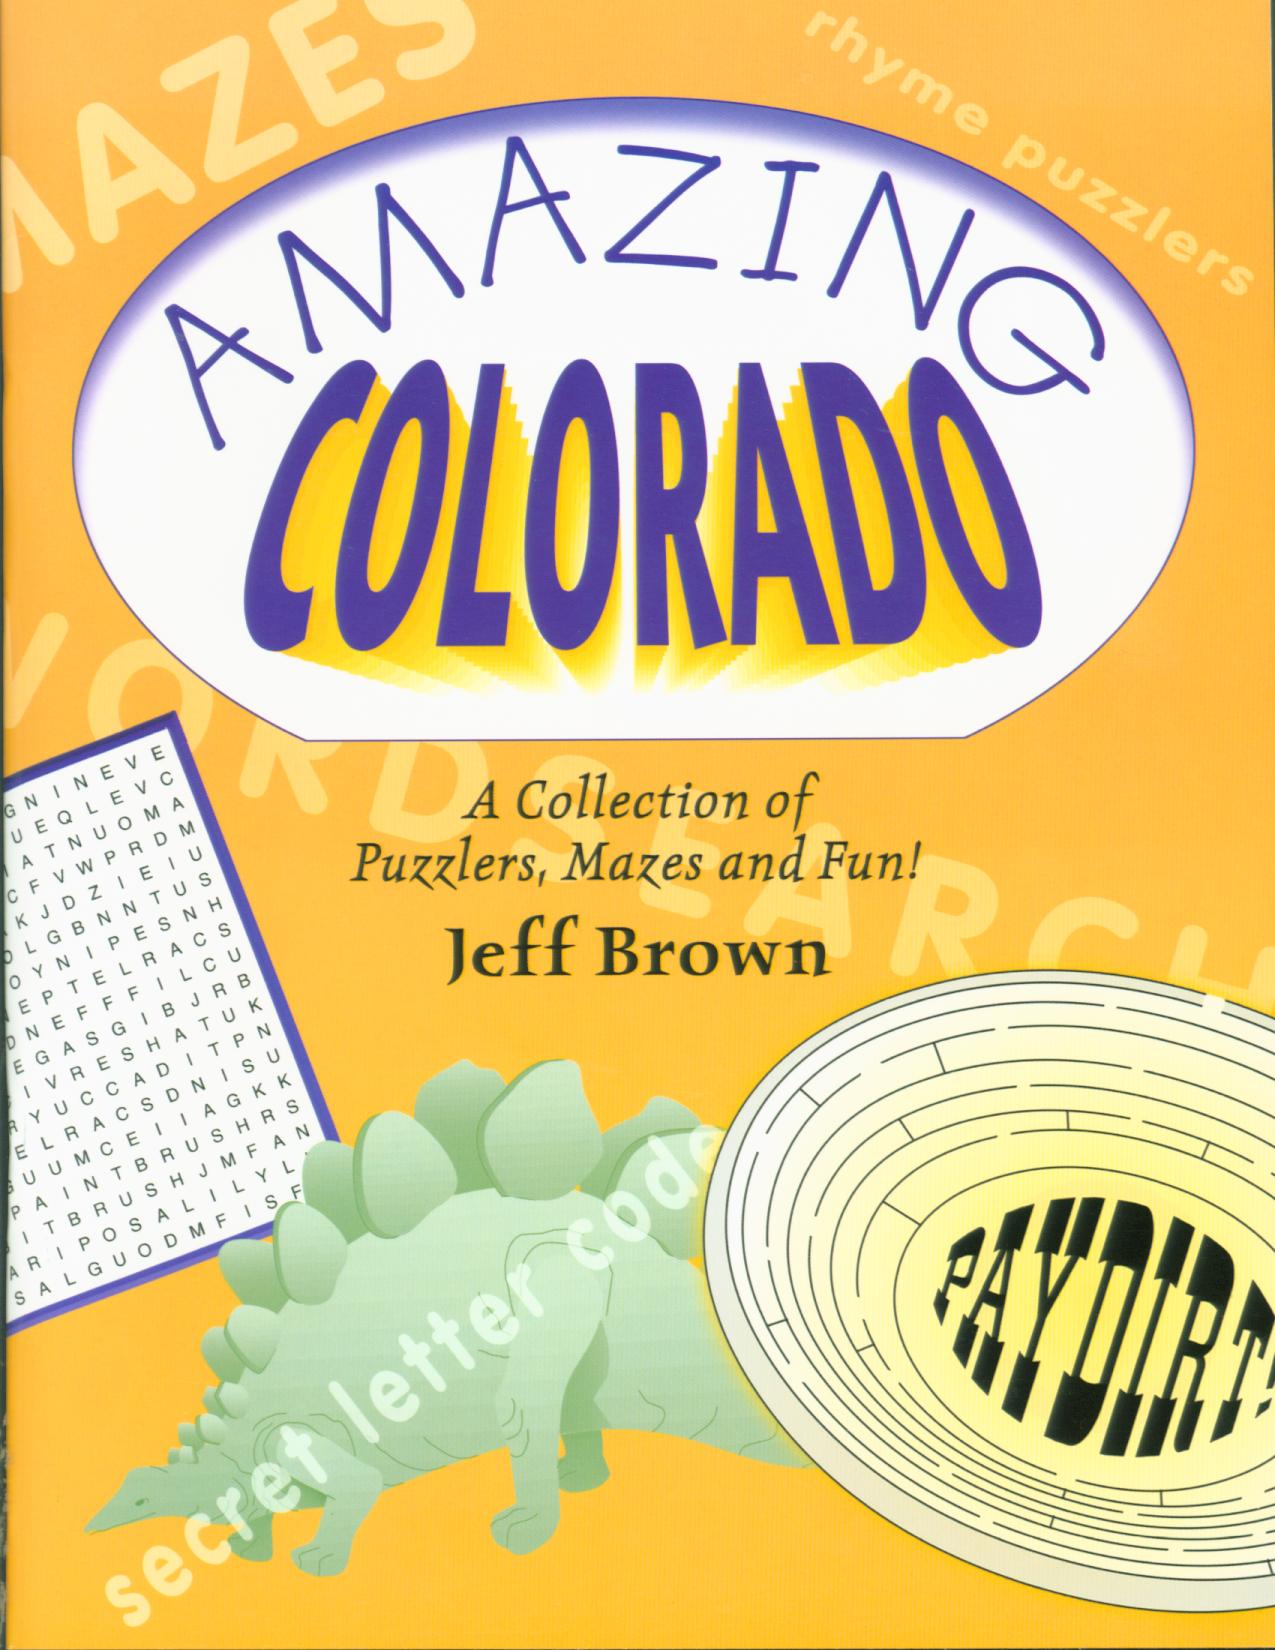 AMAZING COLORADO: a collection of puzzlers, mazes, and fun! 